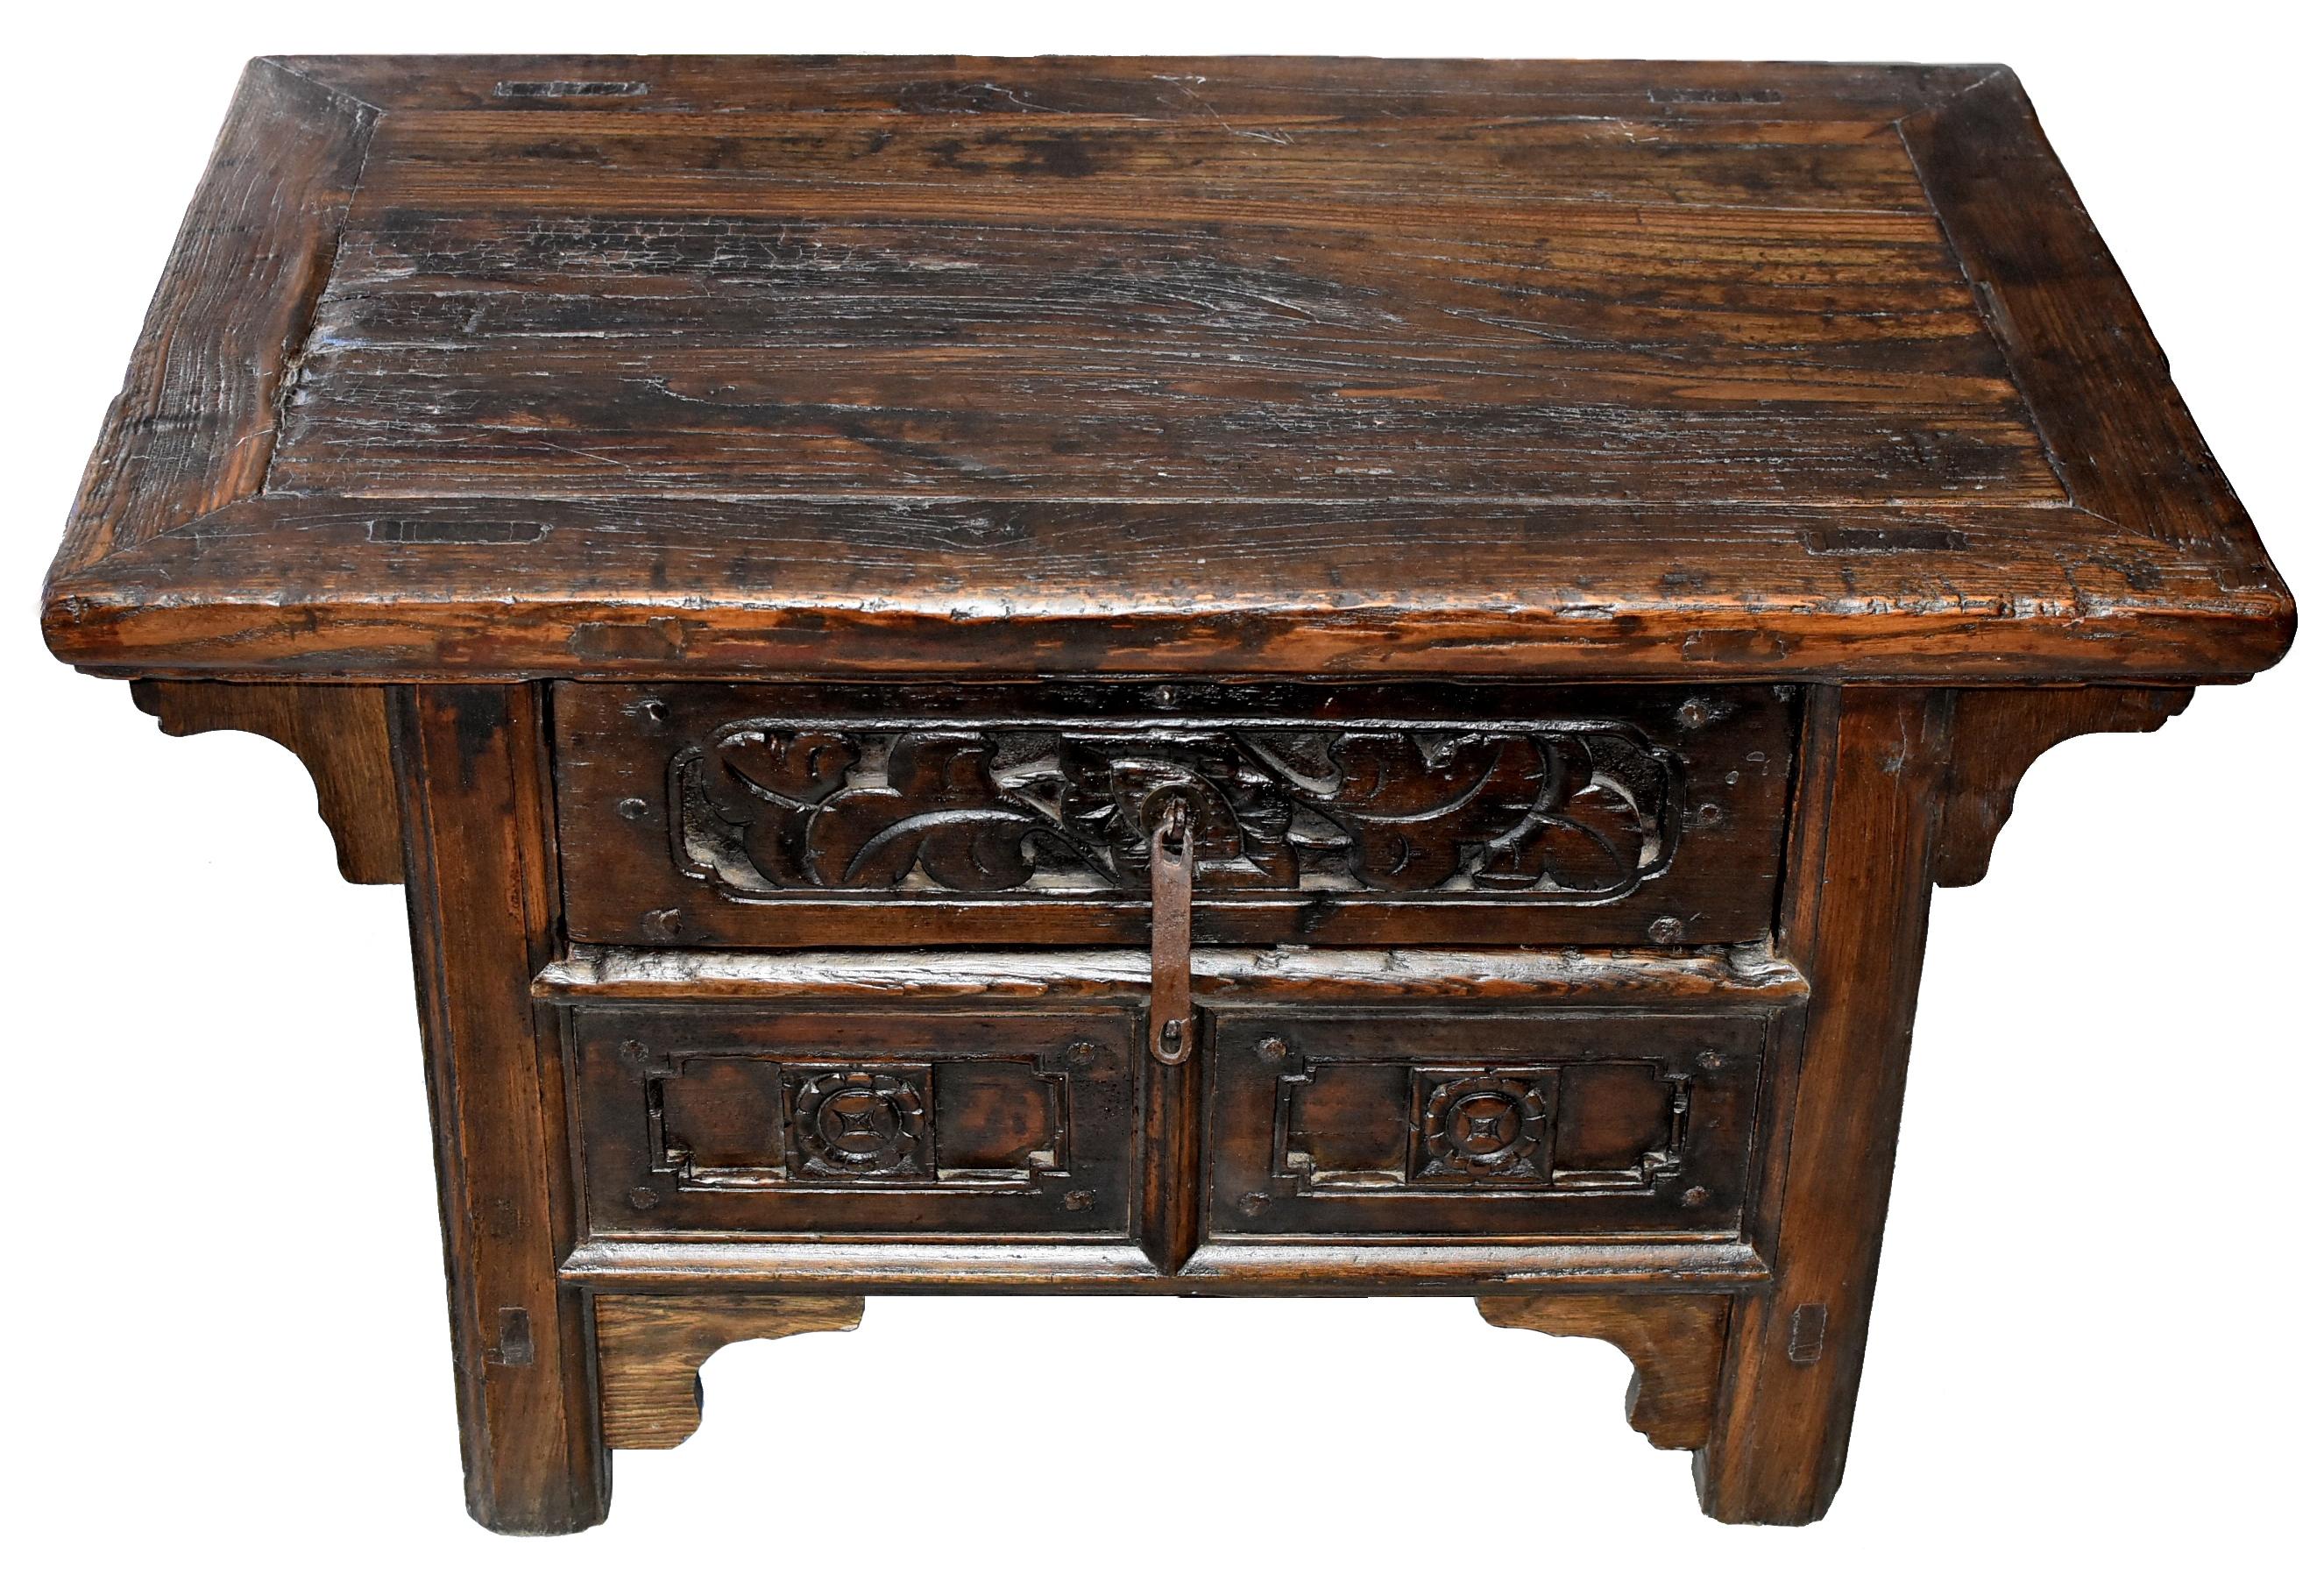 A beautiful rustic low table from Northern China. Its thick solid top has wonderful naturally aged patina. Front of the table is carved with typical Northern Chinese flower and geometric patterns. A large drawer provides ample storage. This is a